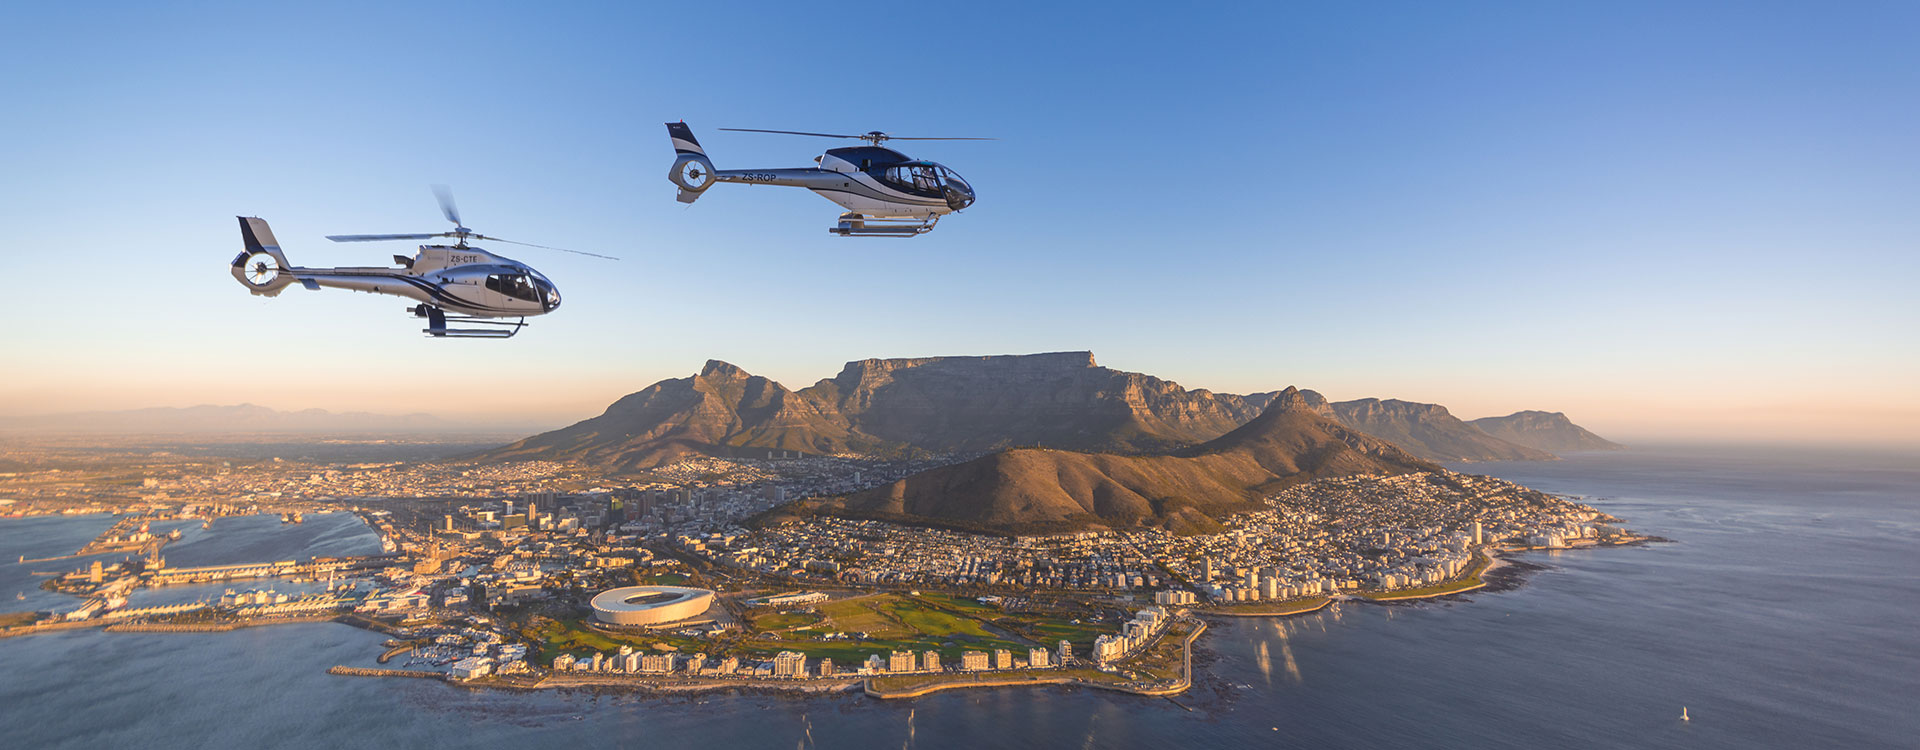 30 Minute Two Oceans Helicopter Flip